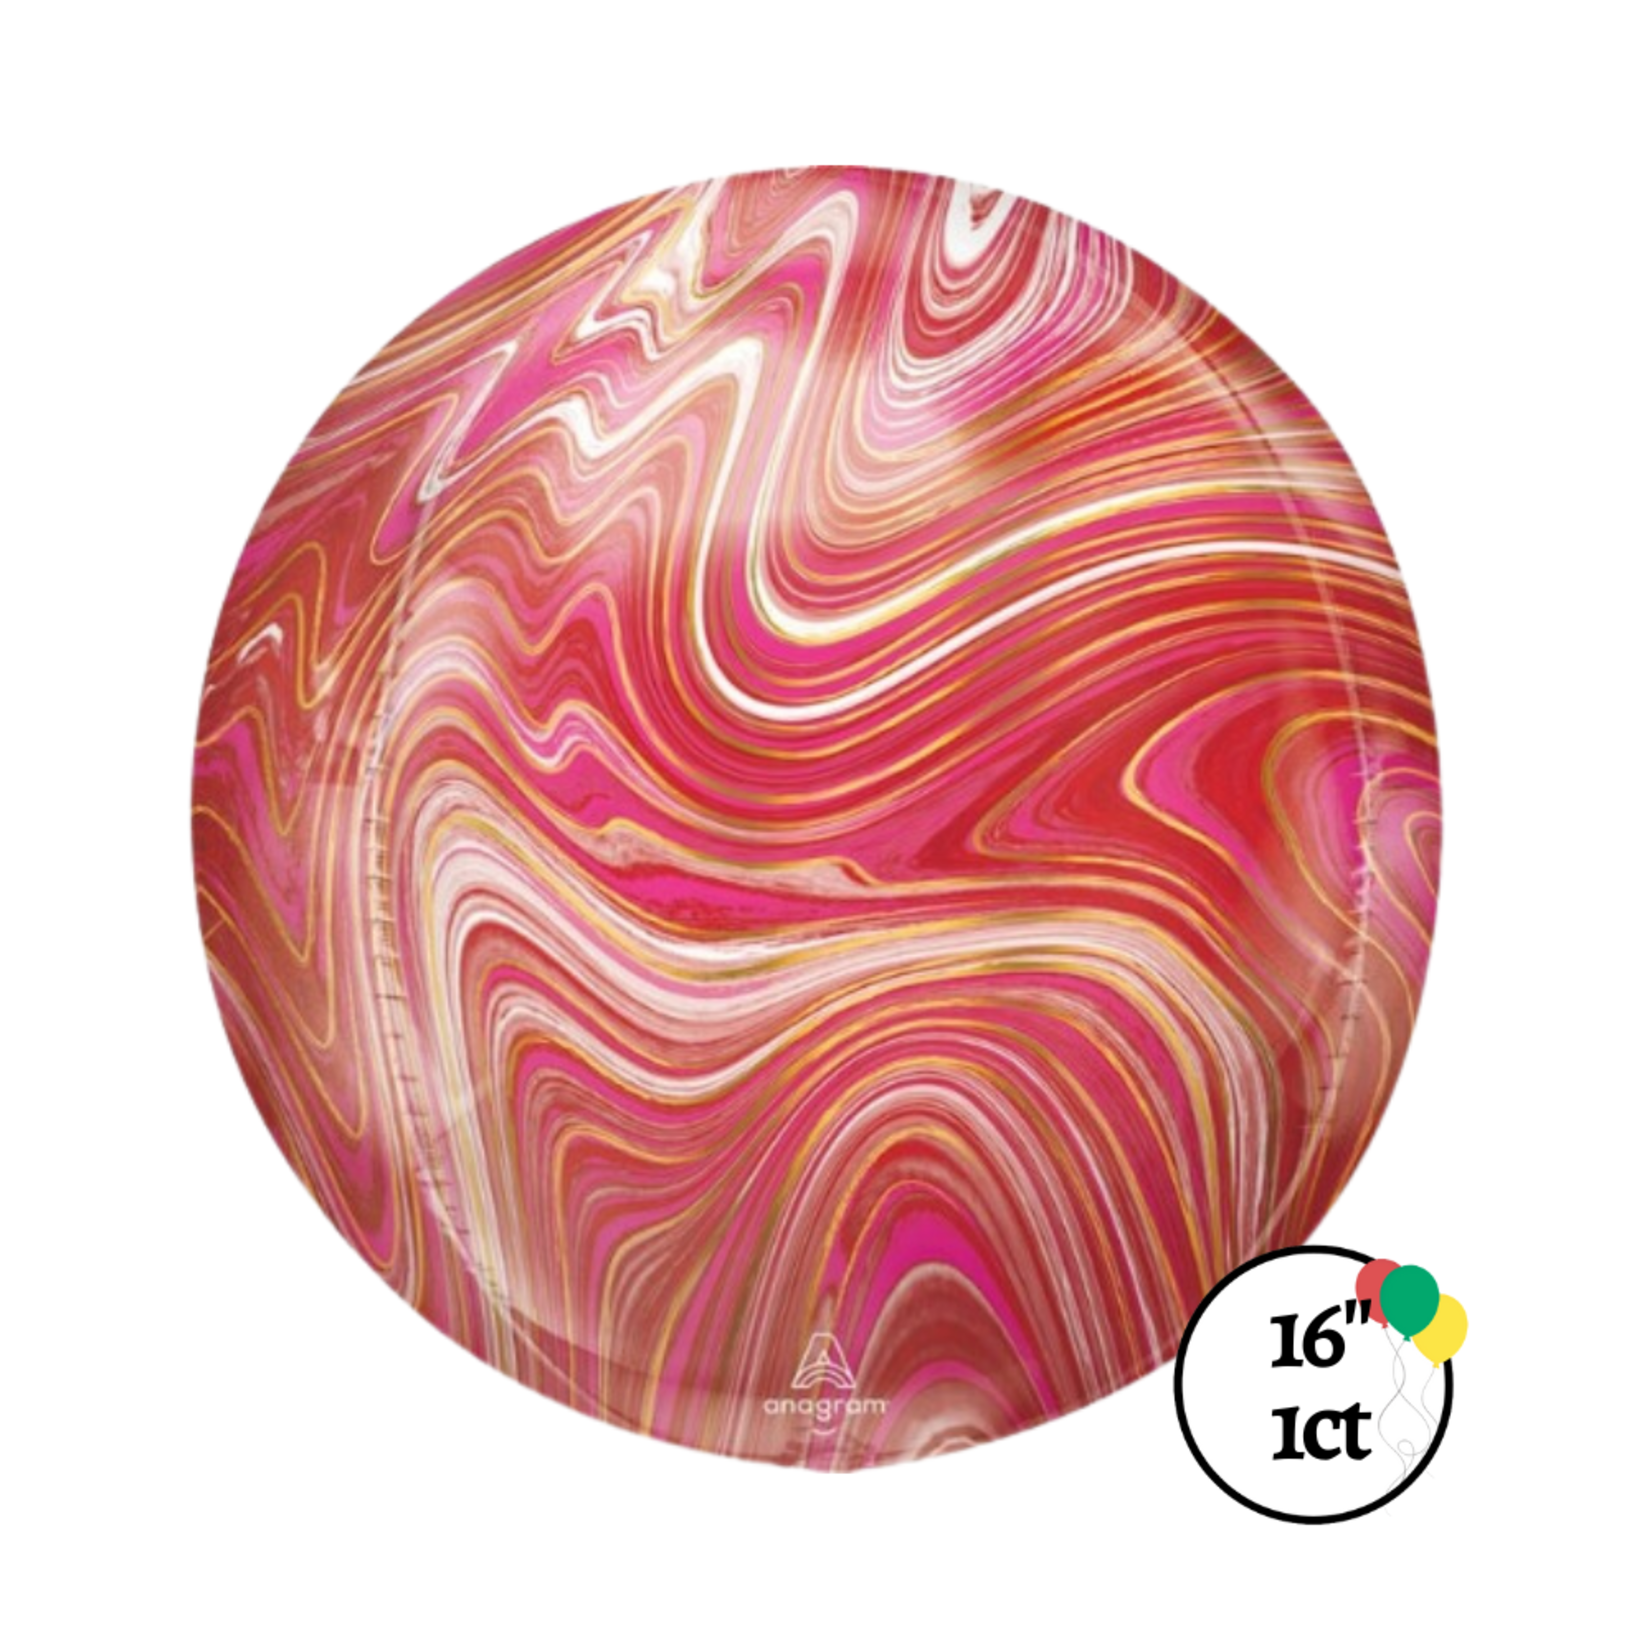 16" Red Marble Orbz Balloon